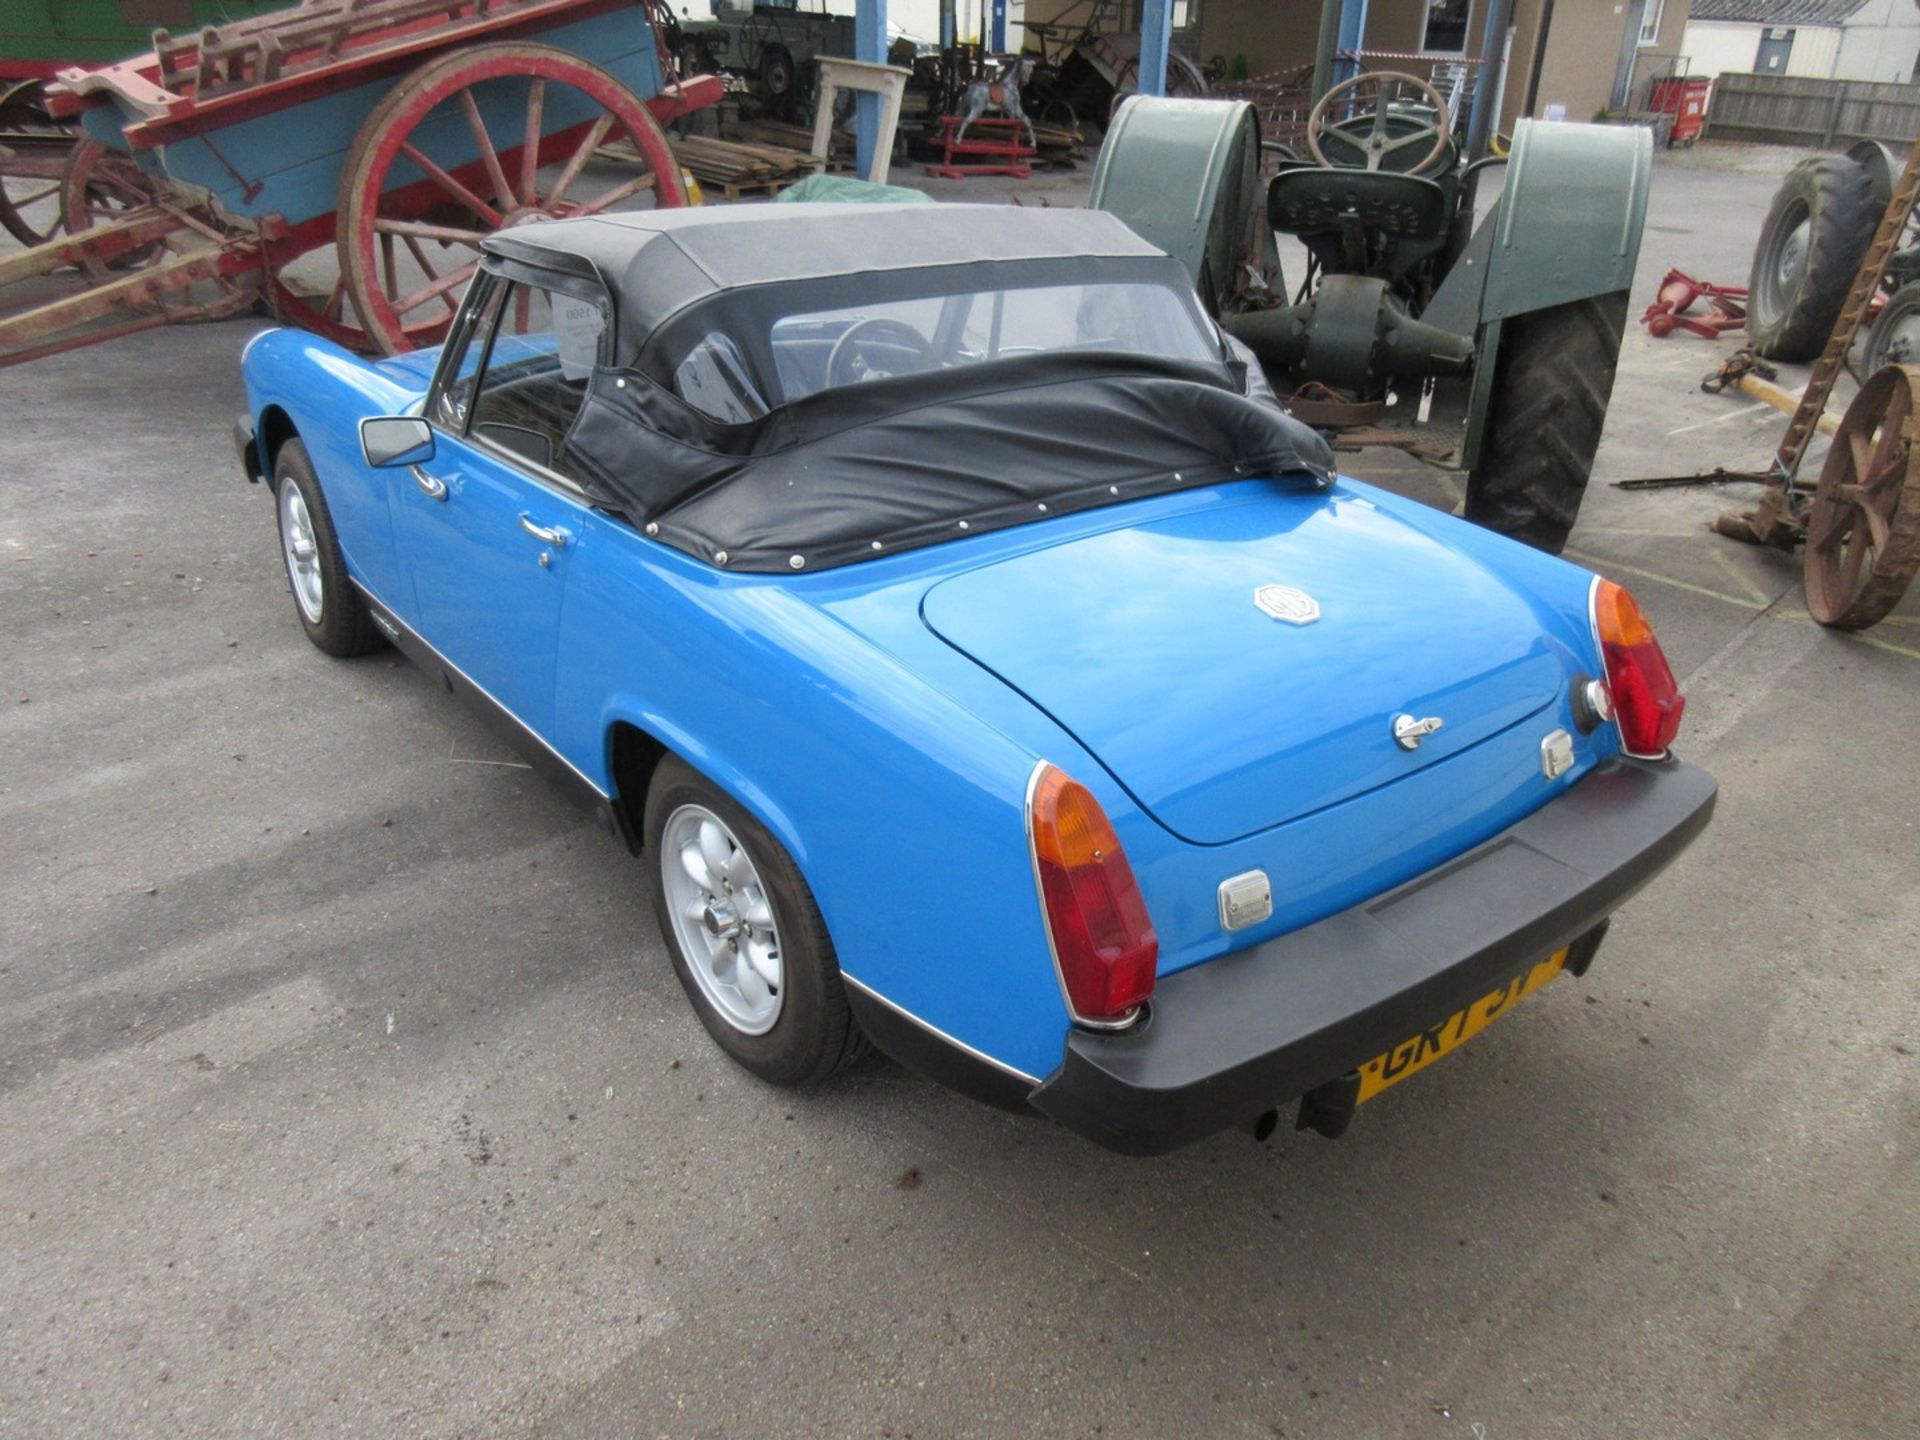 1979 MG Midget 1500 Car, 55000 miles from new, MOT until April 2020, walnut dash and steering wheel - Image 5 of 5